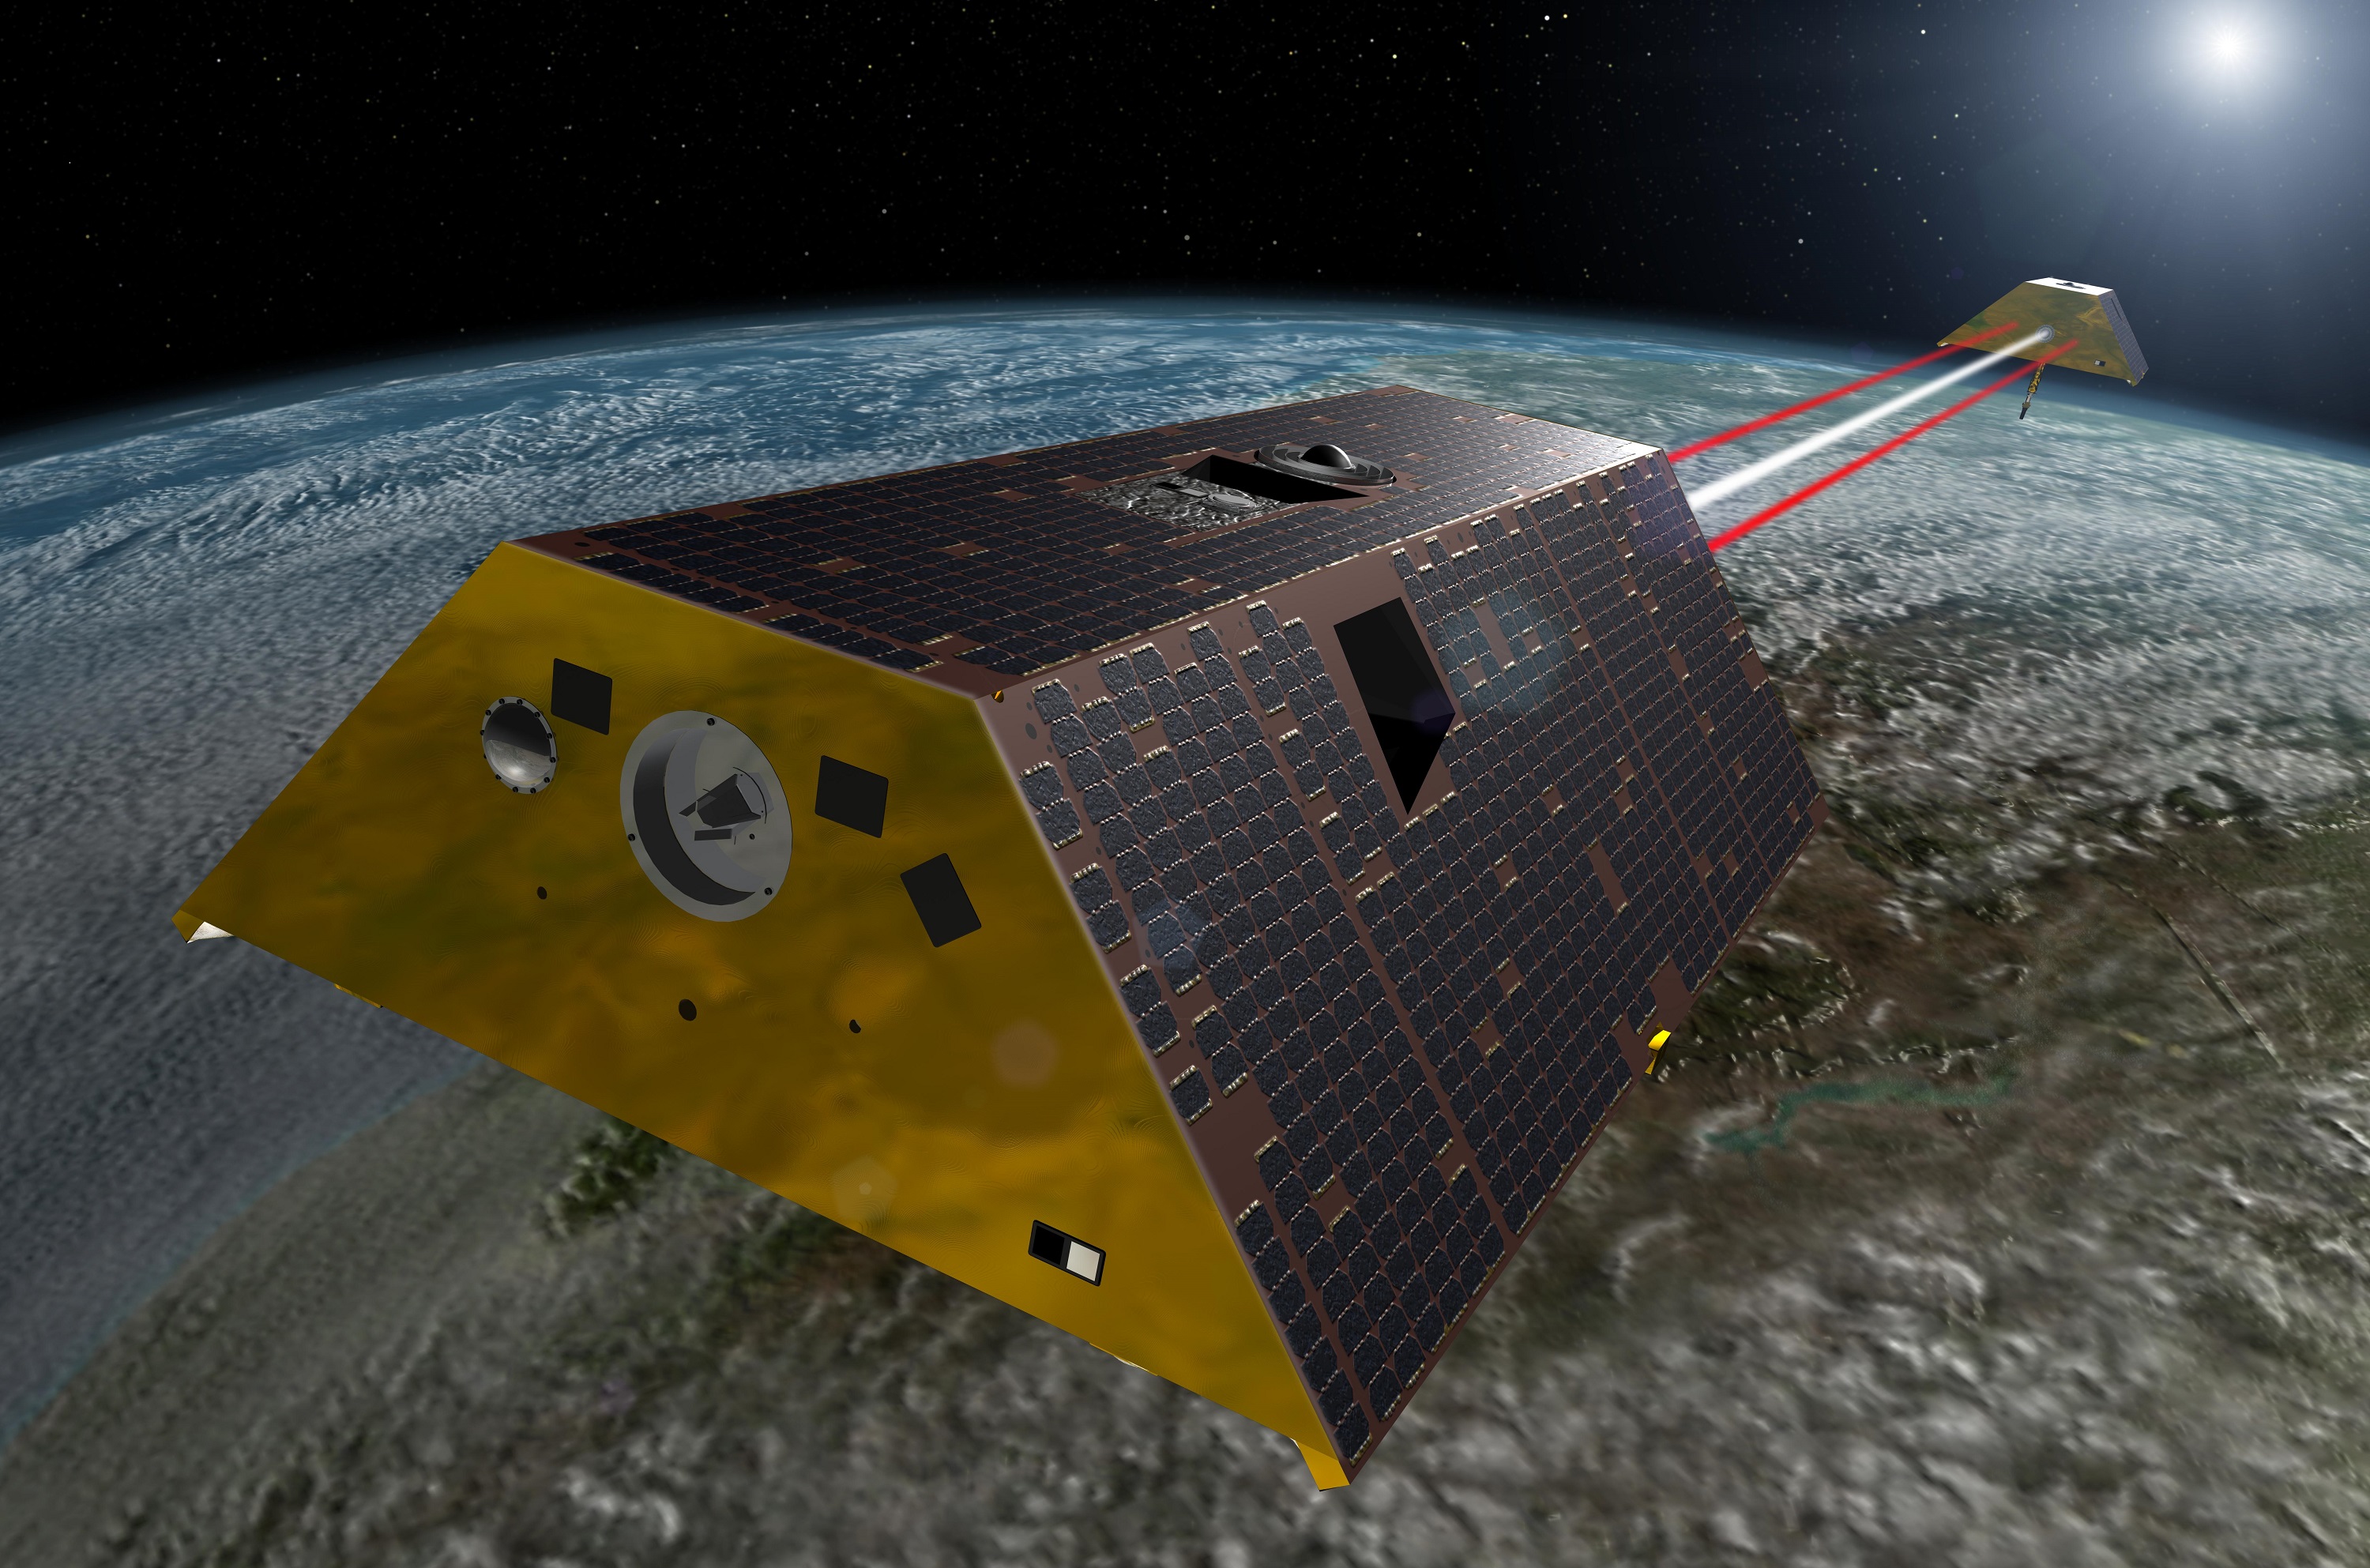 NASA’s Gravity Recovery and Climate Experiment Follow-On (GRACE-FO) mission